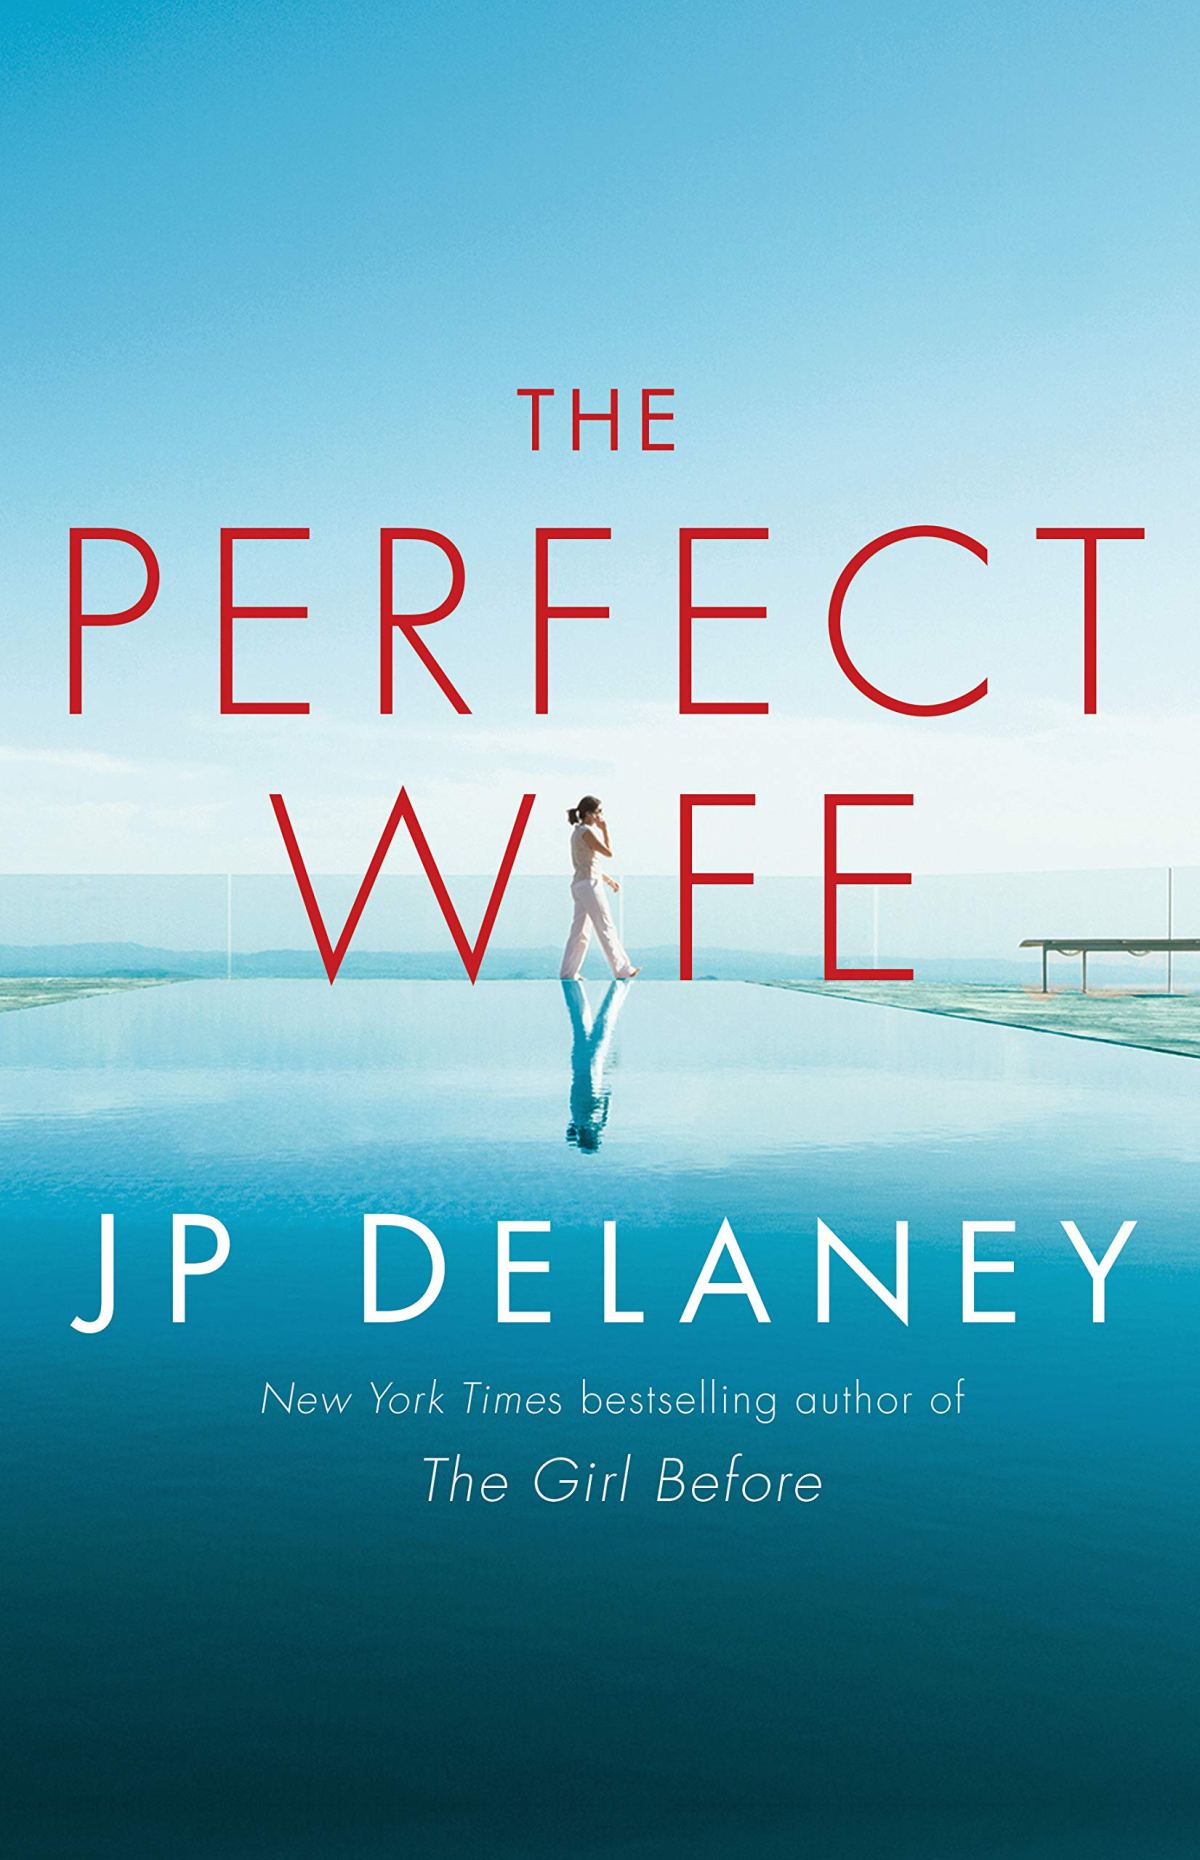 Book 121 – The Perfect Wife by JP Delaney